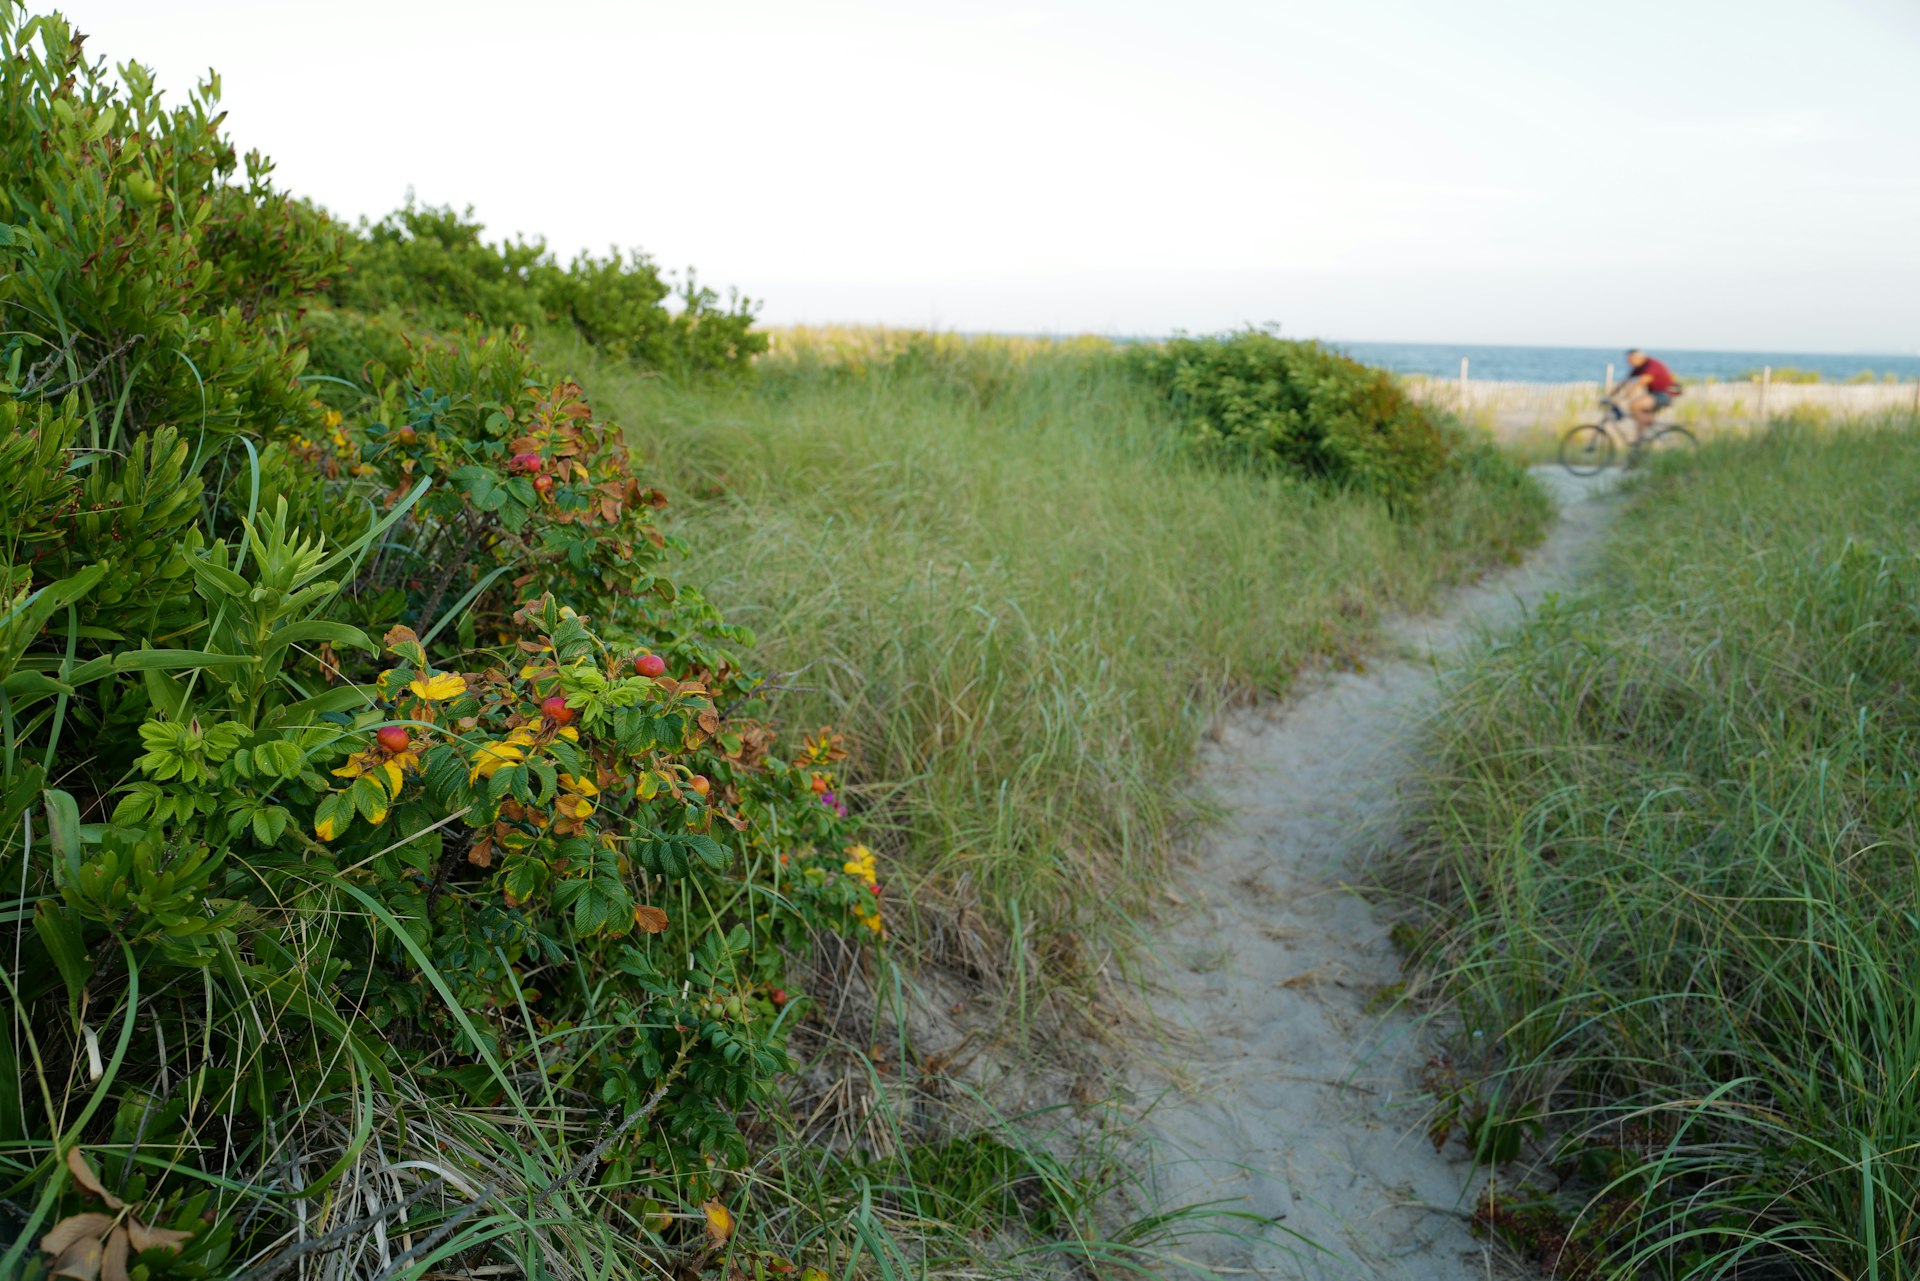 A cyclist passes on a trail through plant-lined sand dunes